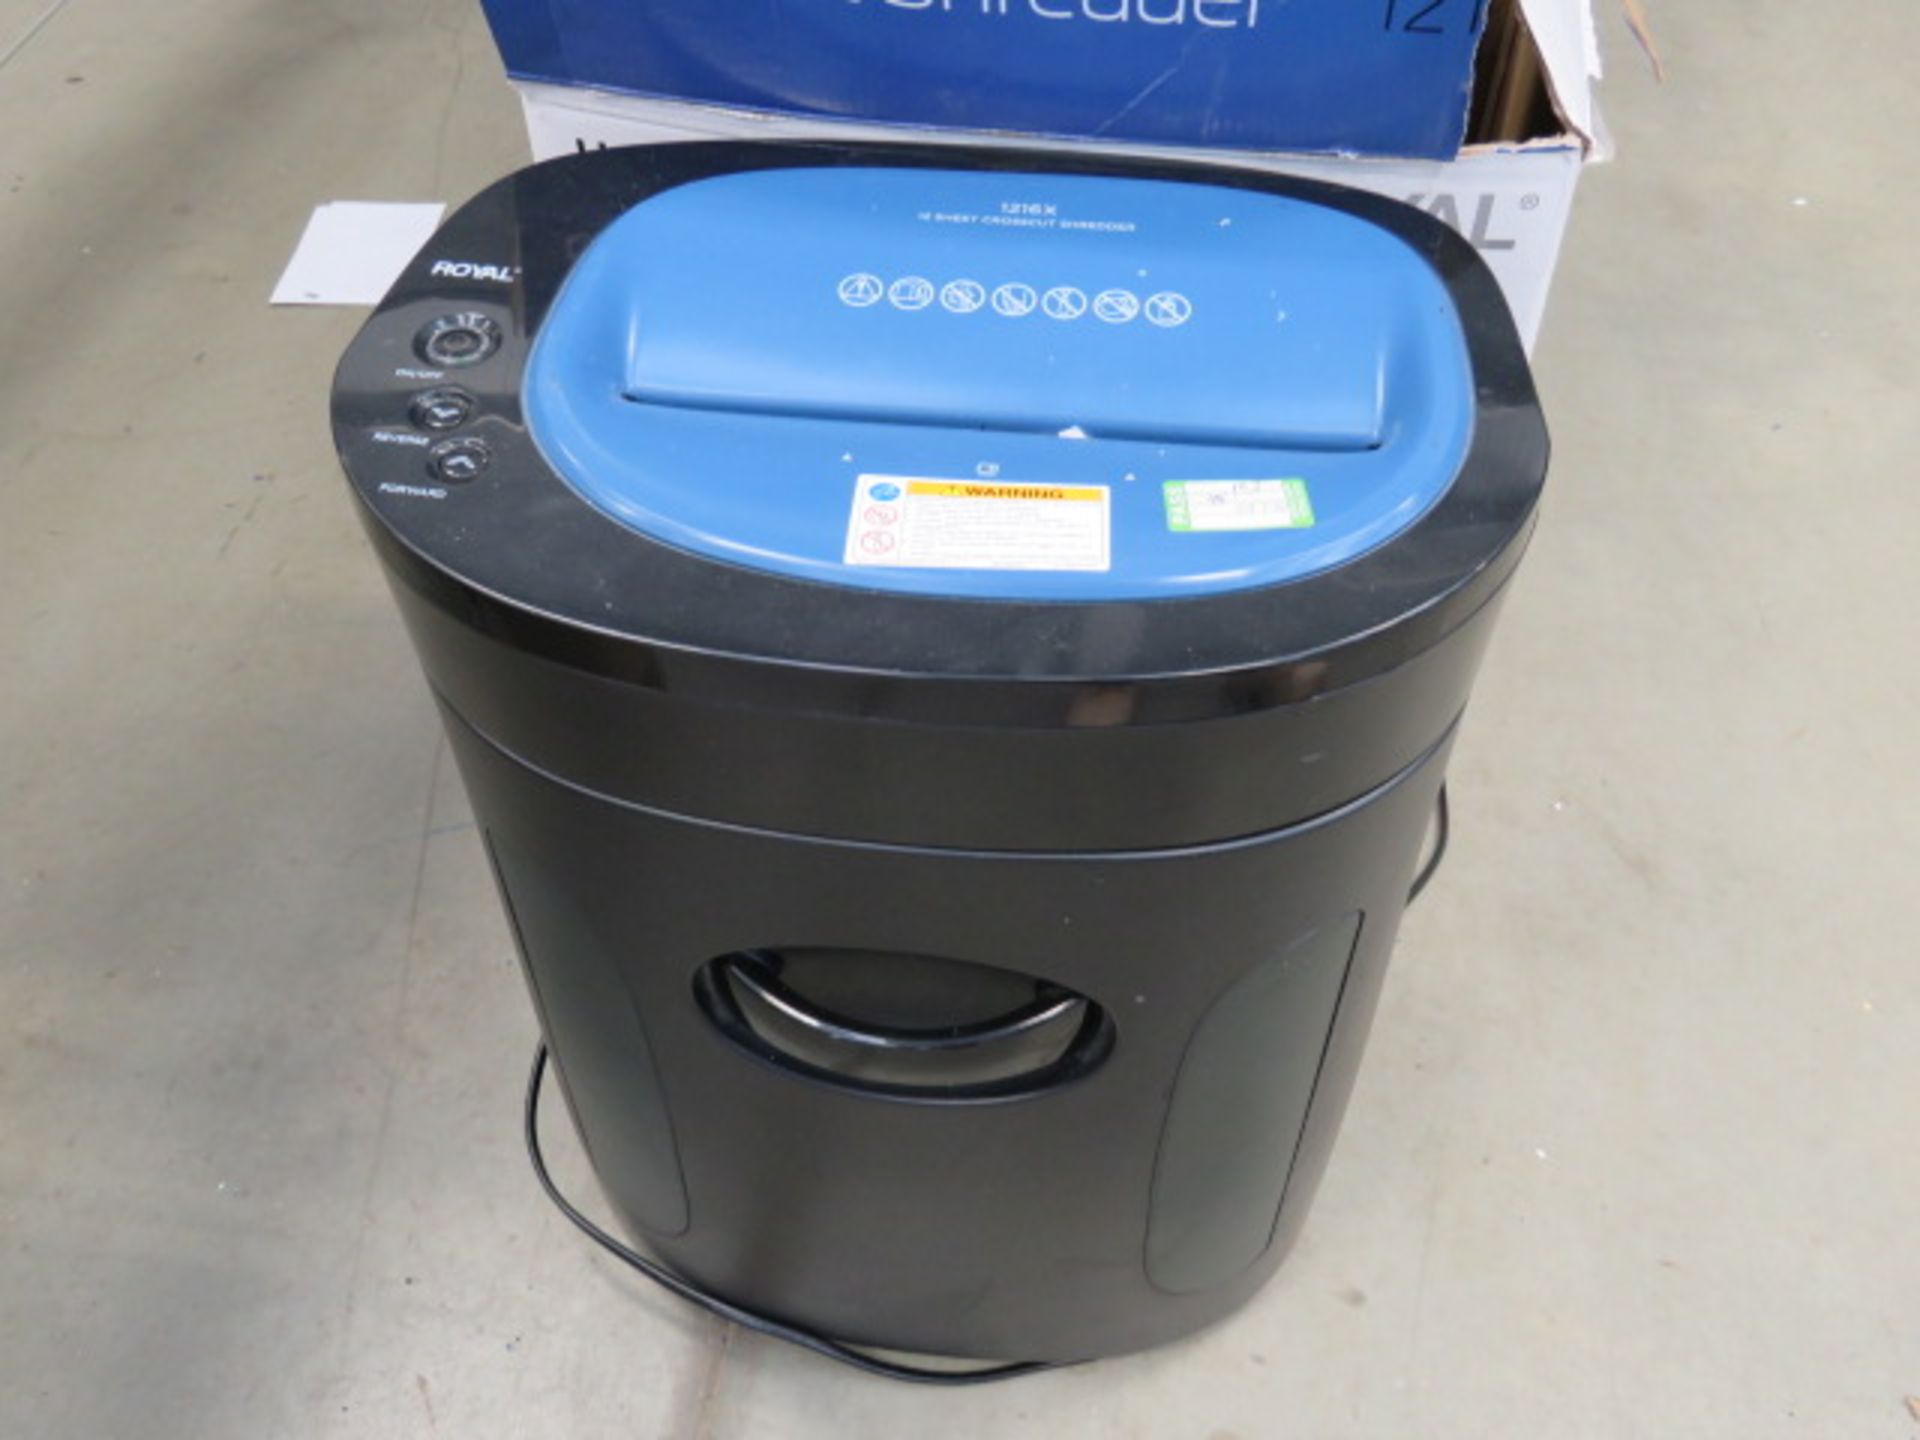 Five boxed and two unboxed Royal paper shredders - Image 2 of 3